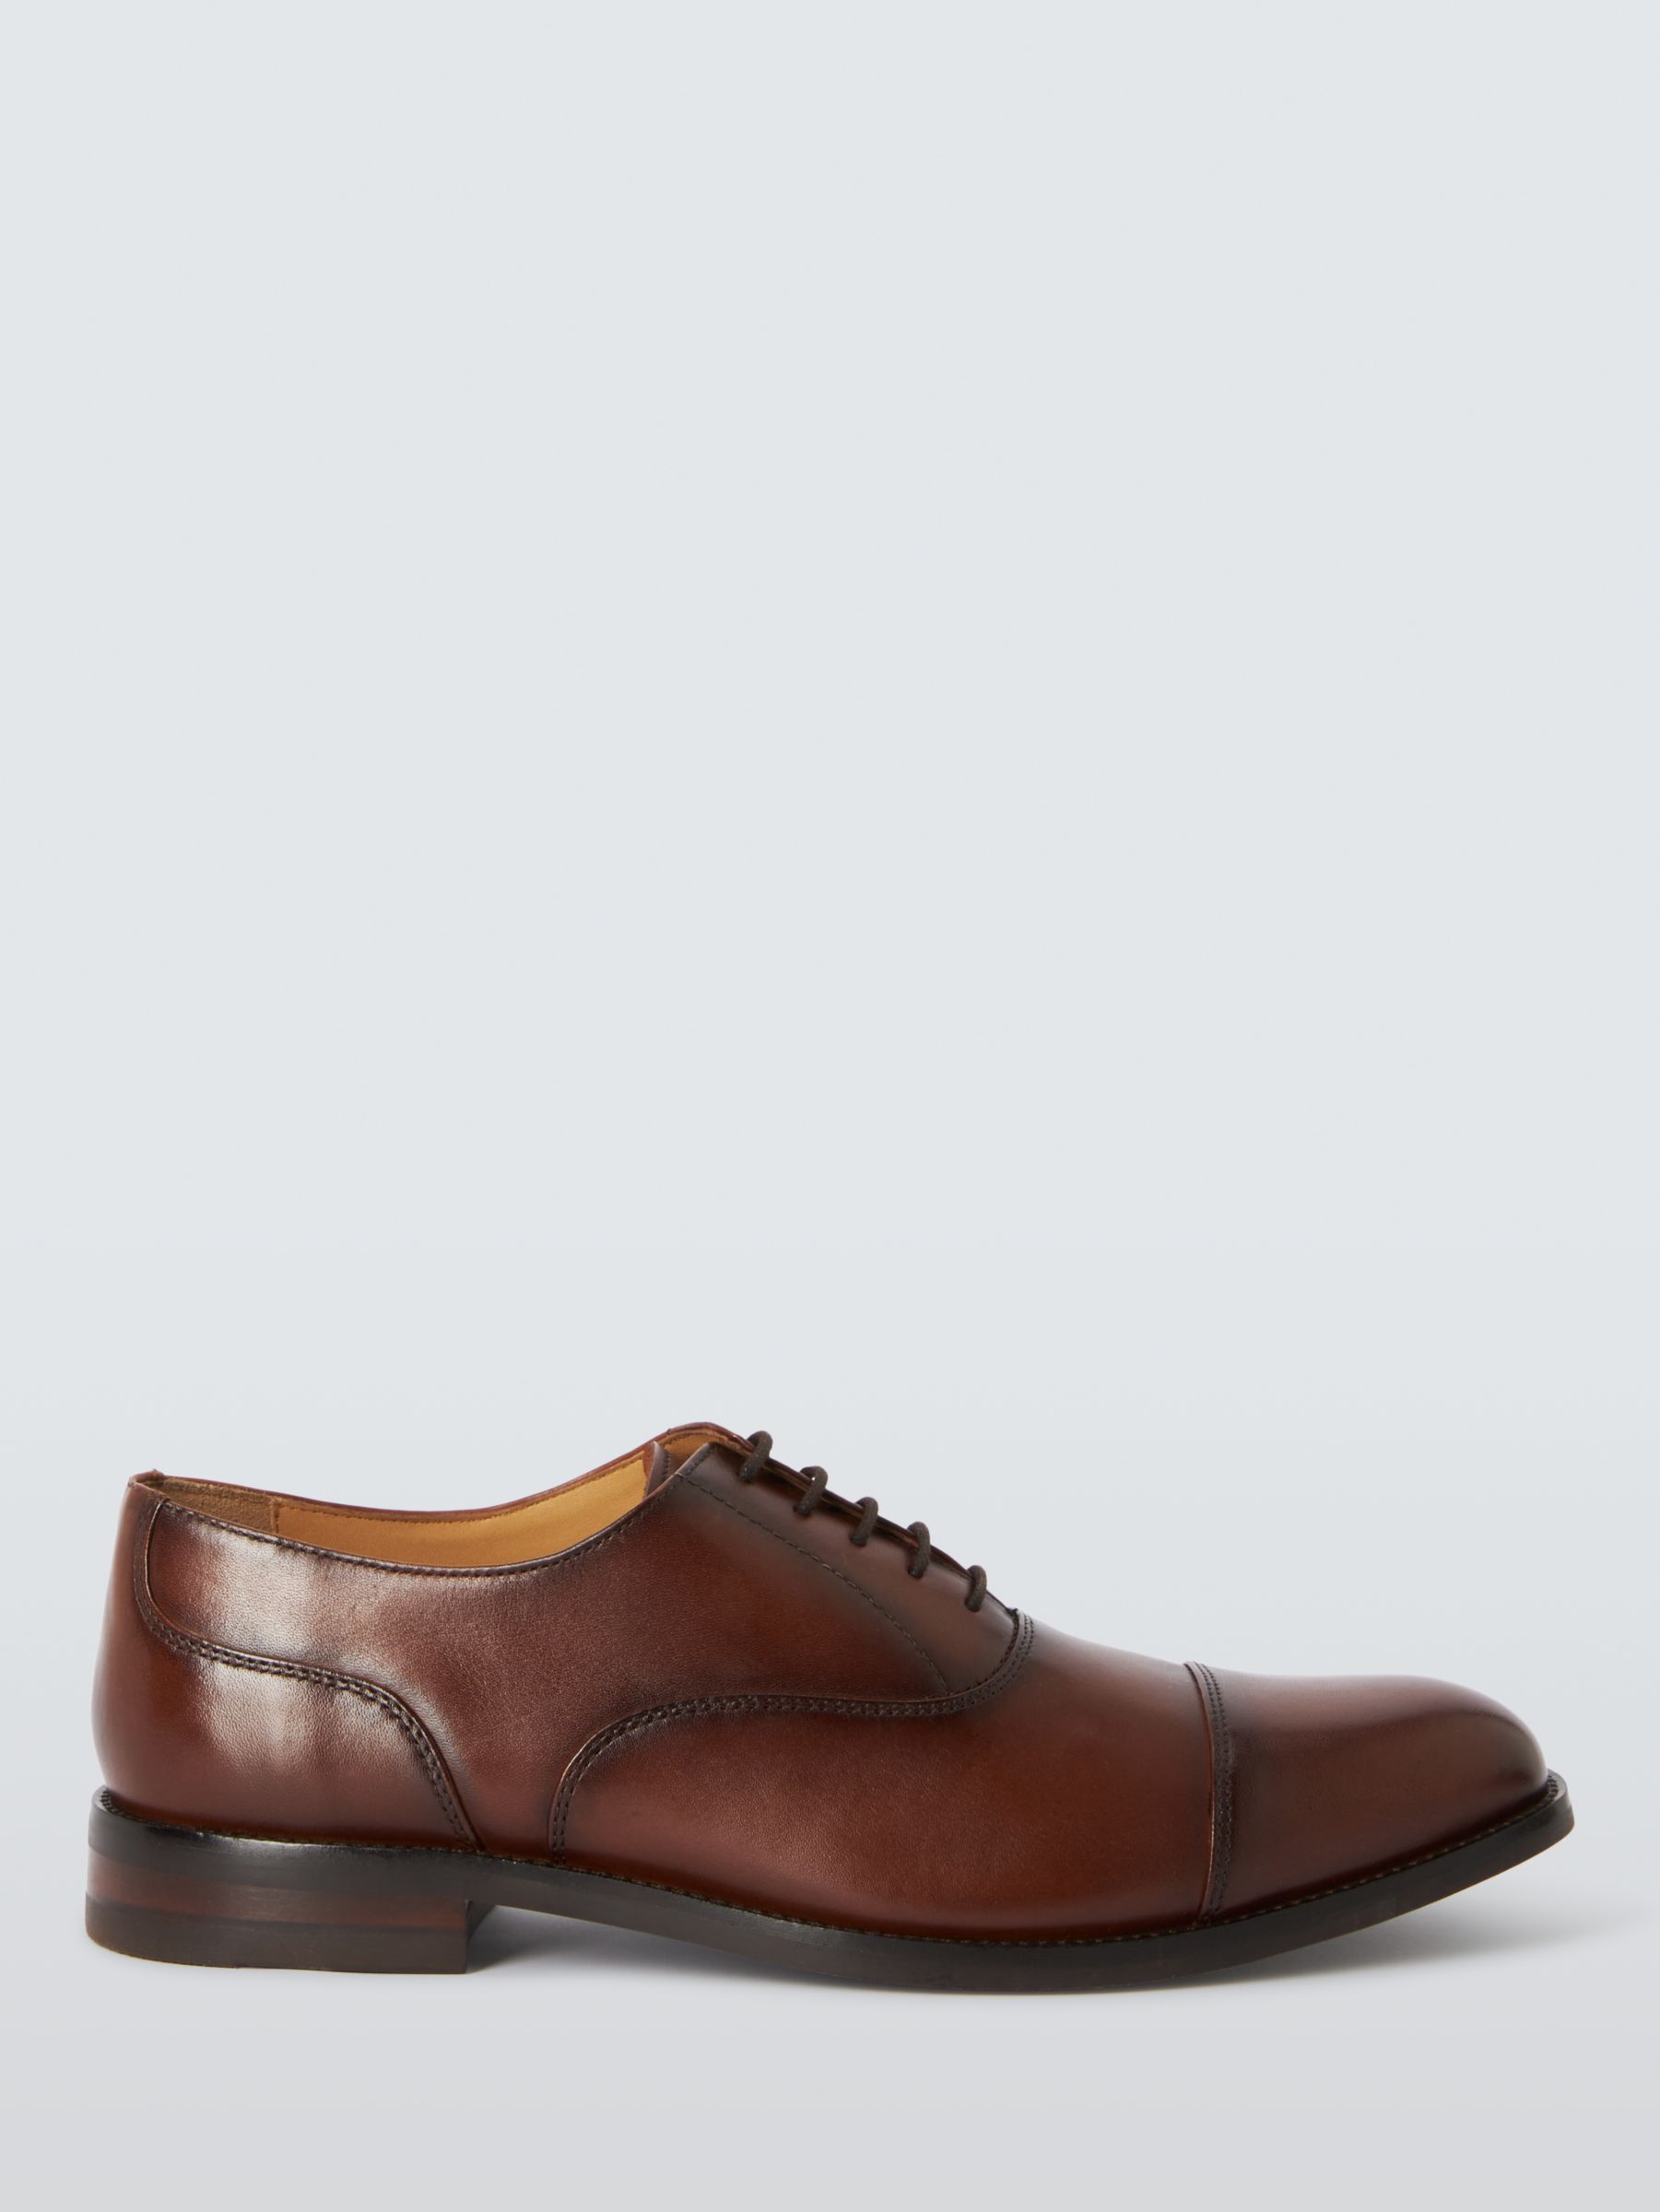 John Lewis Leather Classic Oxford Shoes, Mid Brown, 8